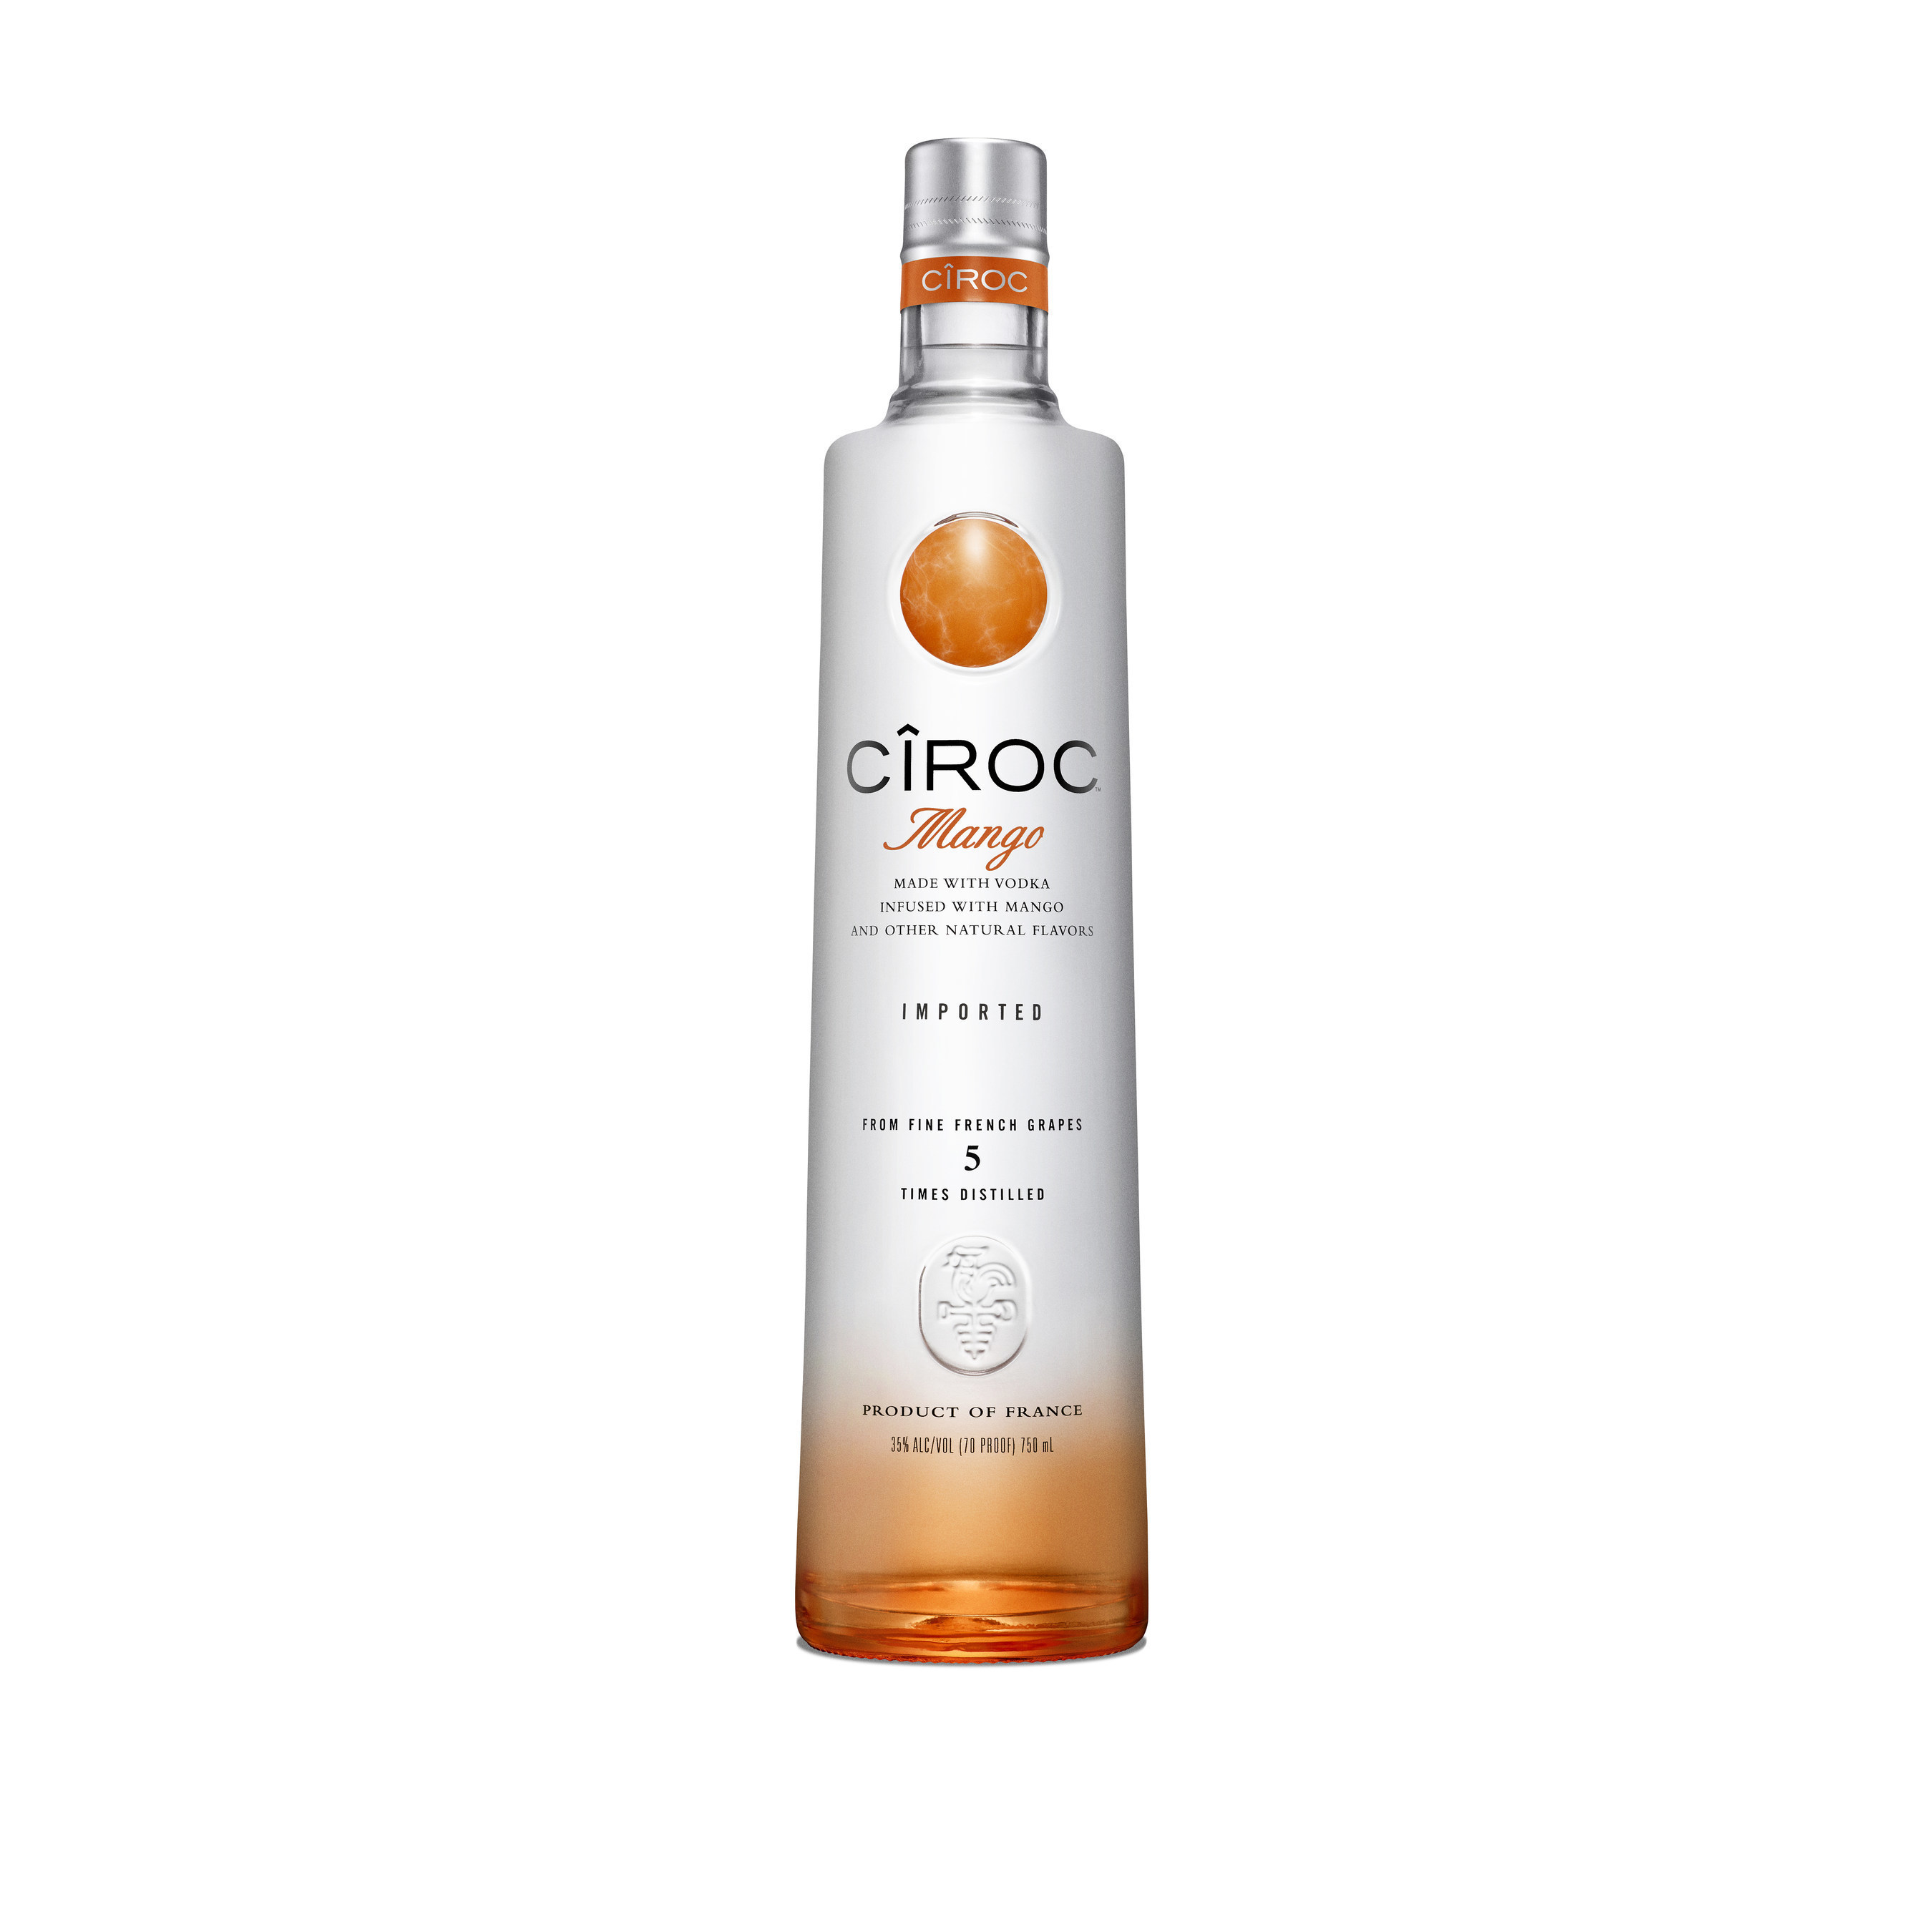 SEAN "DIDDY" COMBS AND THE MAKERS OF CÎROC ULTRA PREMIUM EXTEND ENTREPRENEUR MOVEMENT WITH NEW CÎROC MANGO